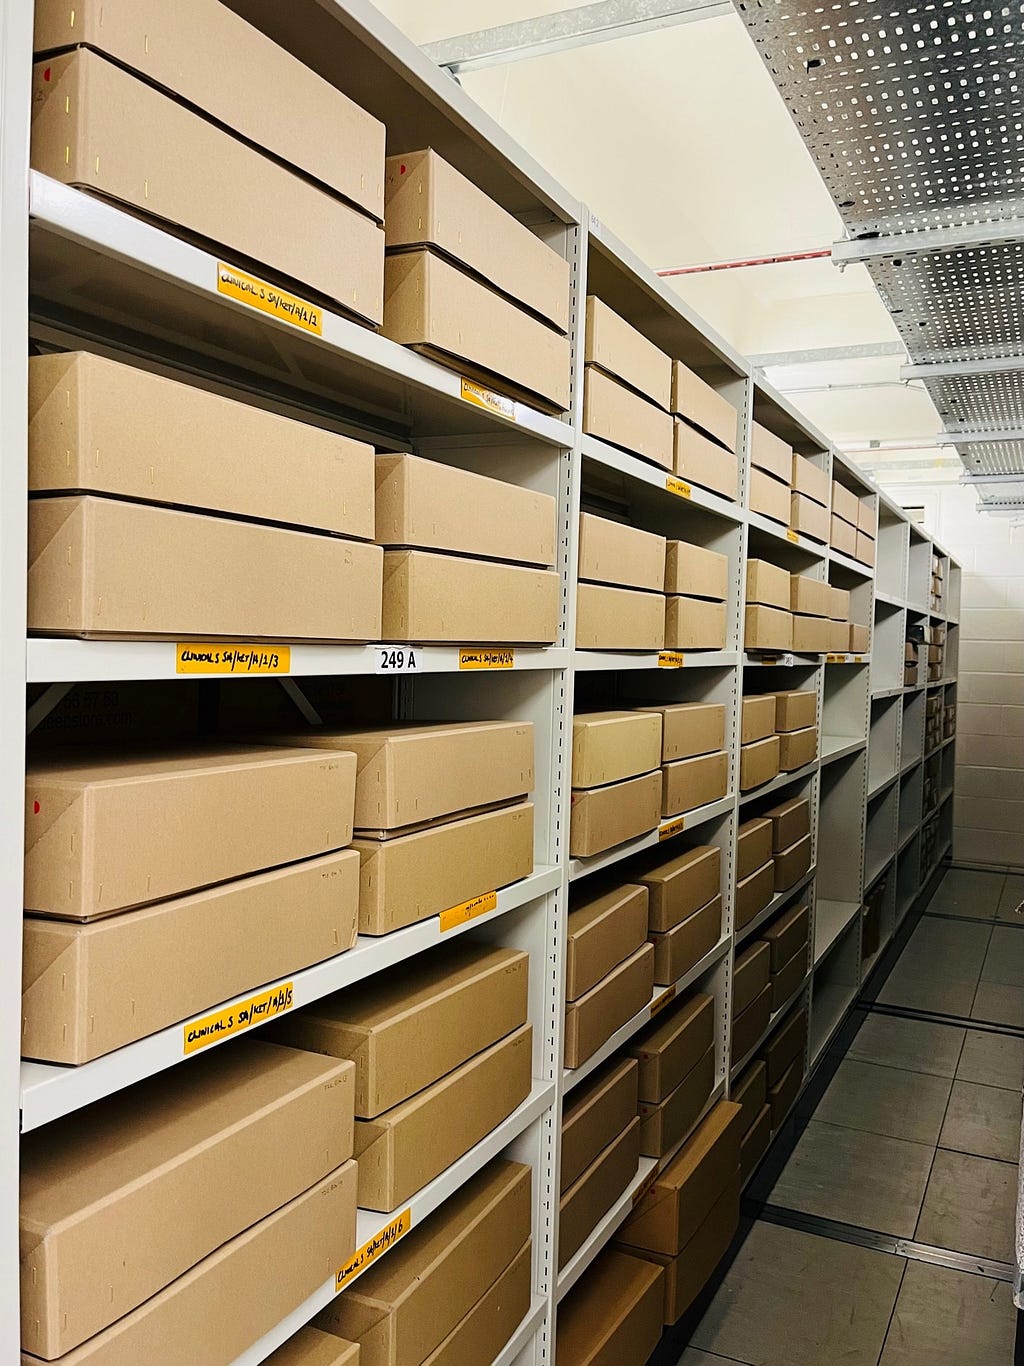 Rows of brown archive boxes that represent completed clinical study archive cataloguing.